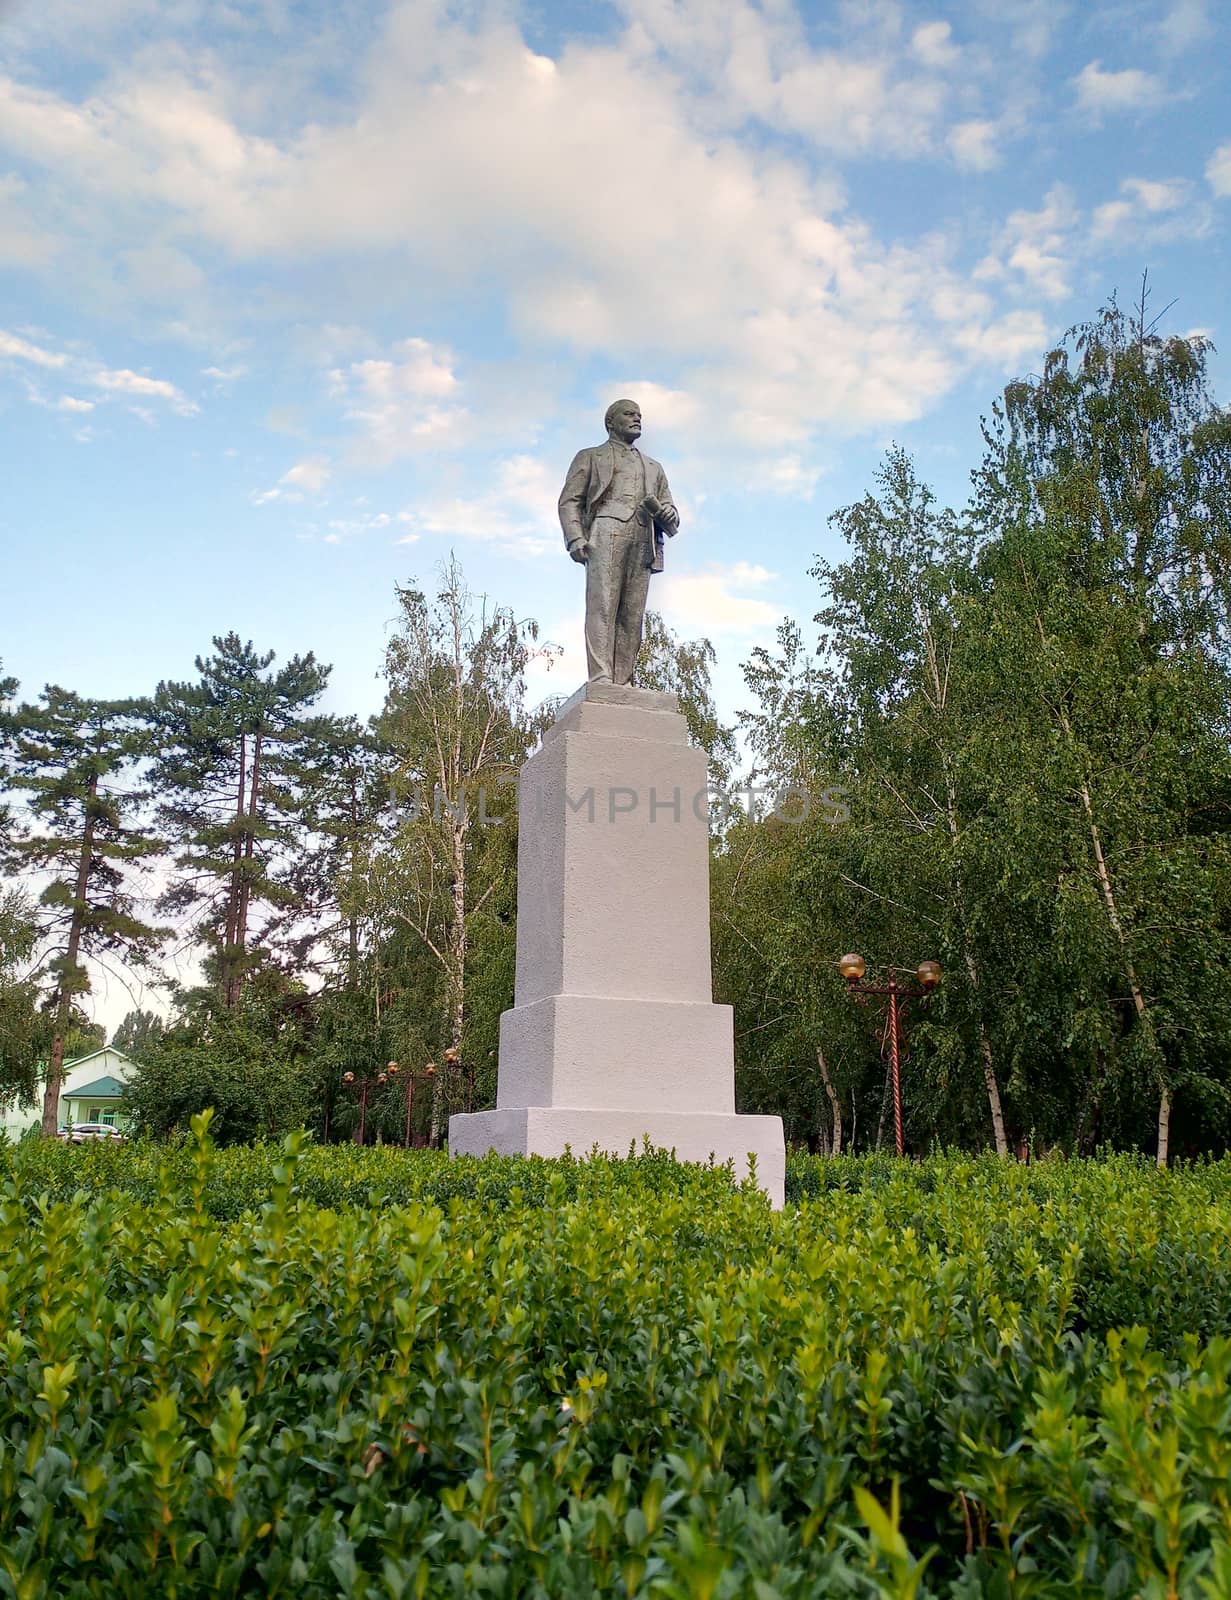 Monument to Lenin on a pedestal in the park. Leader of communism